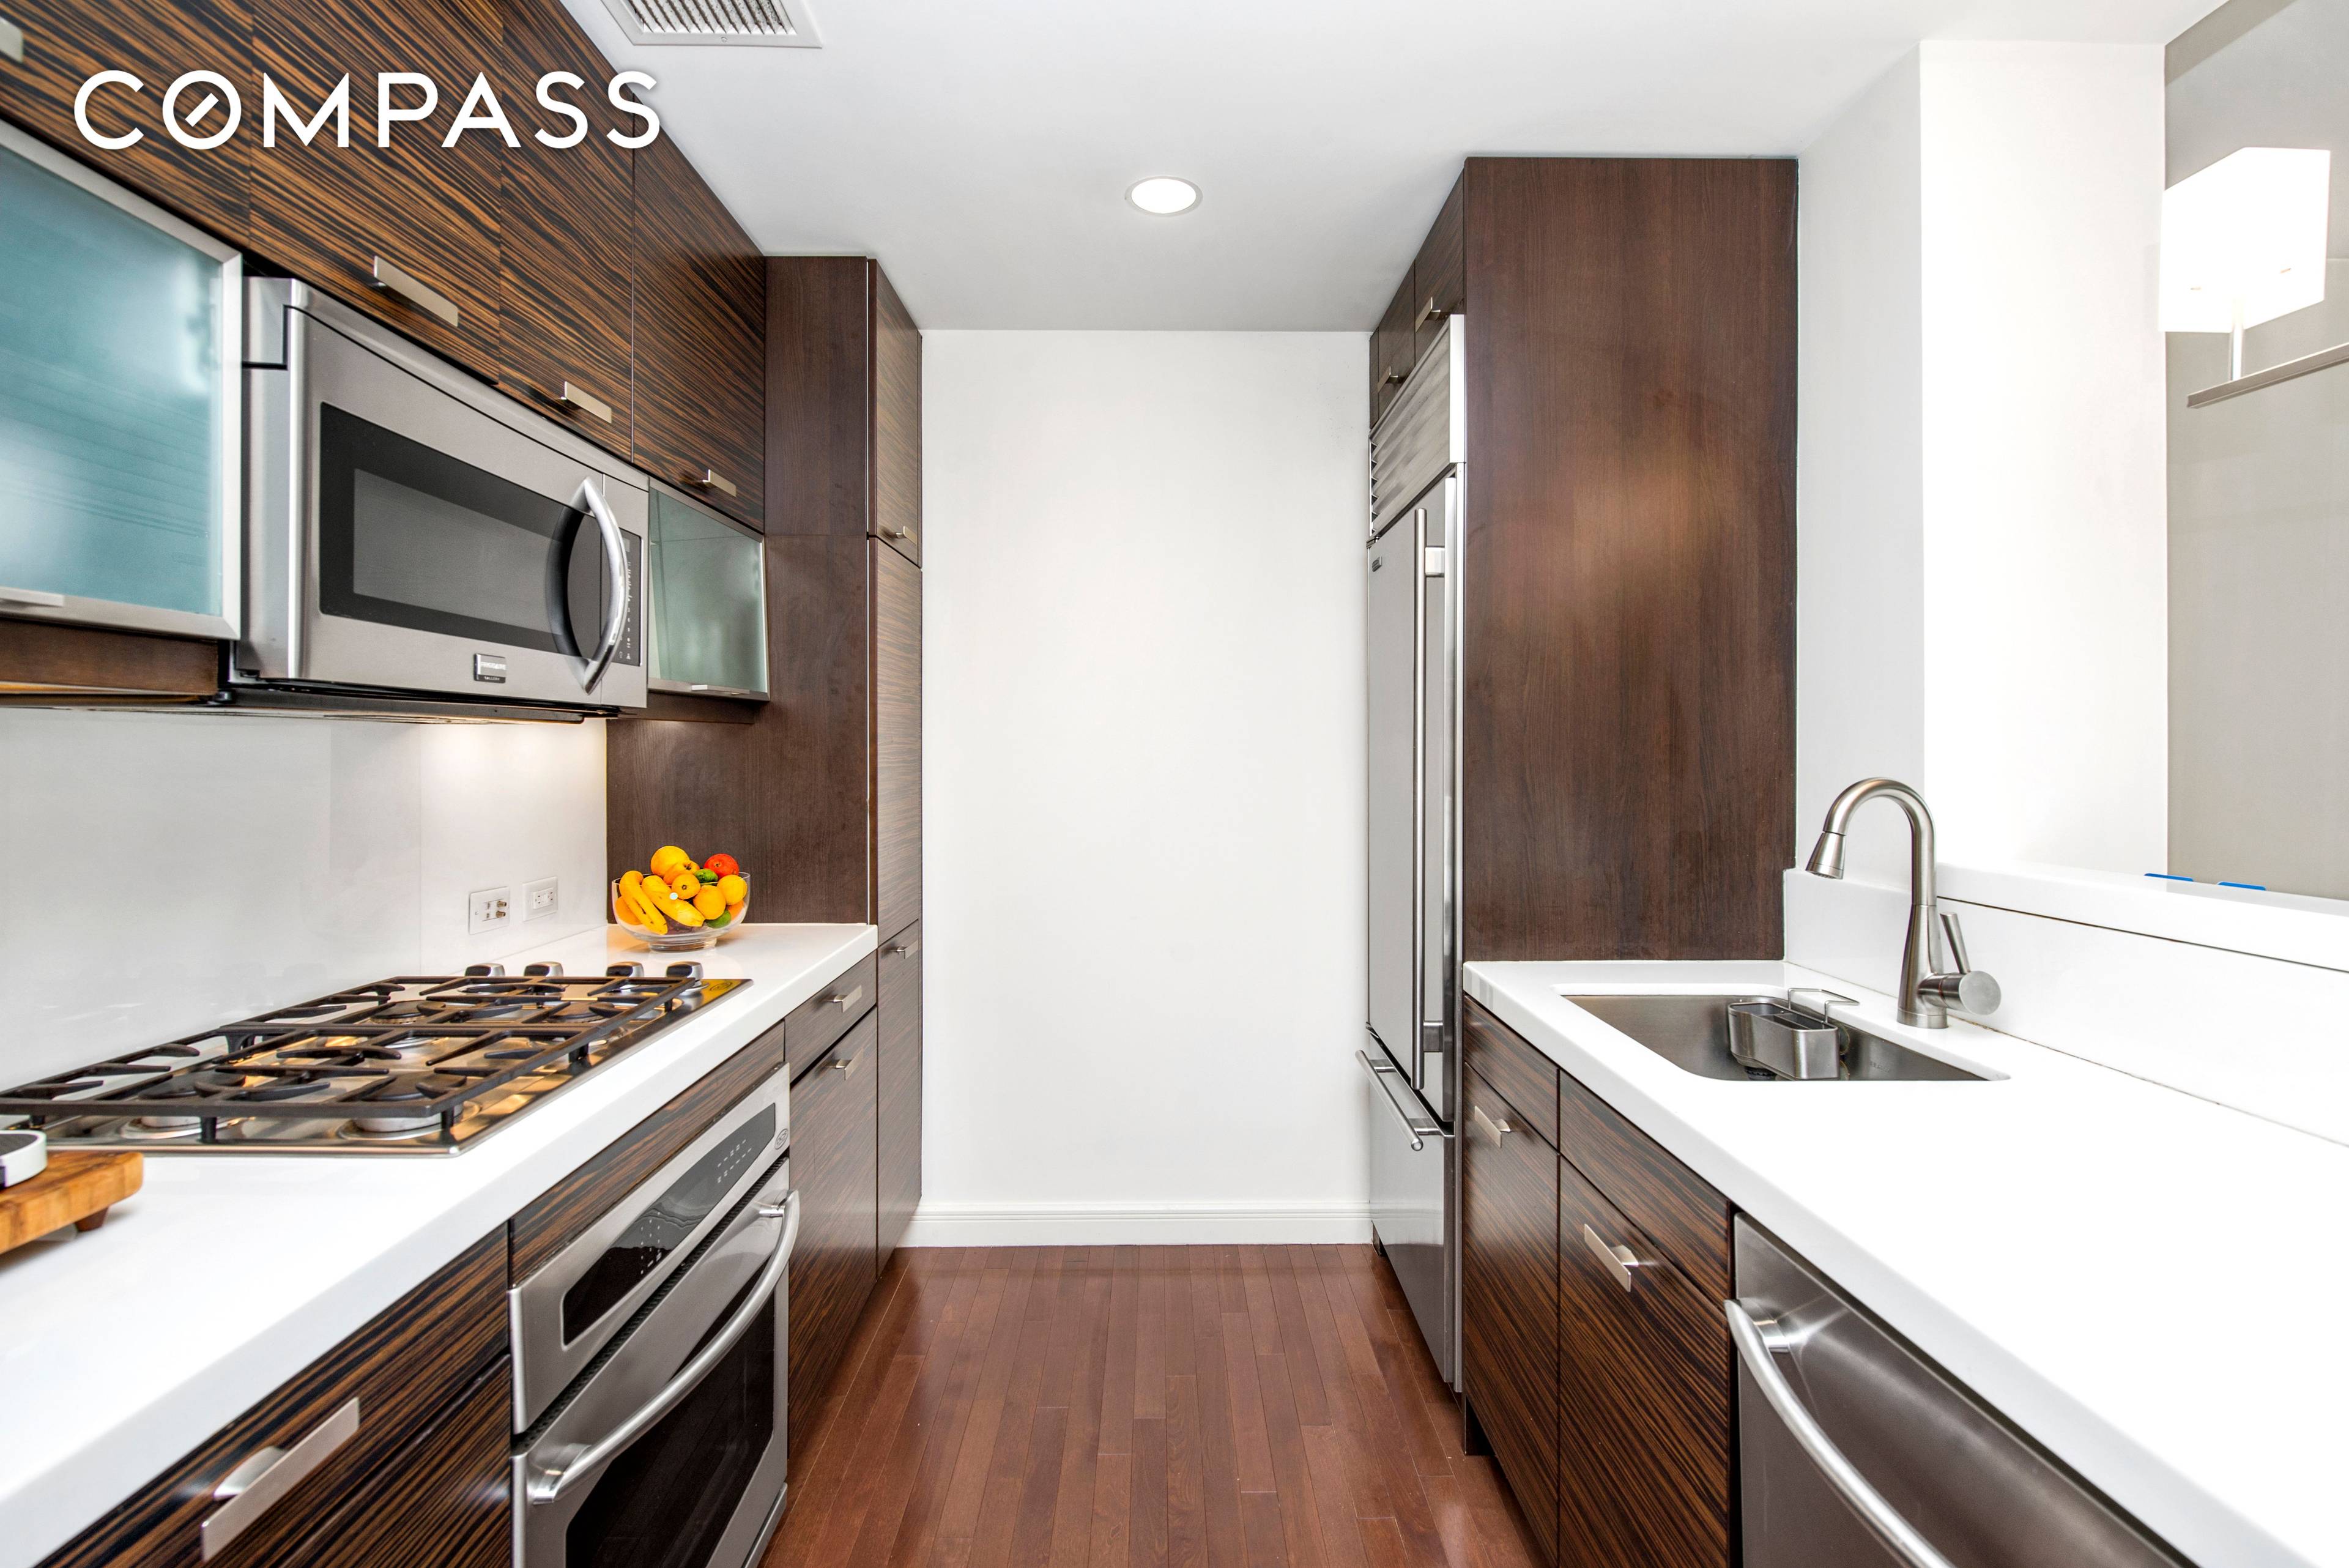 This South facing 2 bedroom features hardwood floors, 3 Zone Central Heat AC, Washer Dryer, a large open chef s kitchen with etched glass cabinetry, crystalline countertops, stainless steel appliances, ...